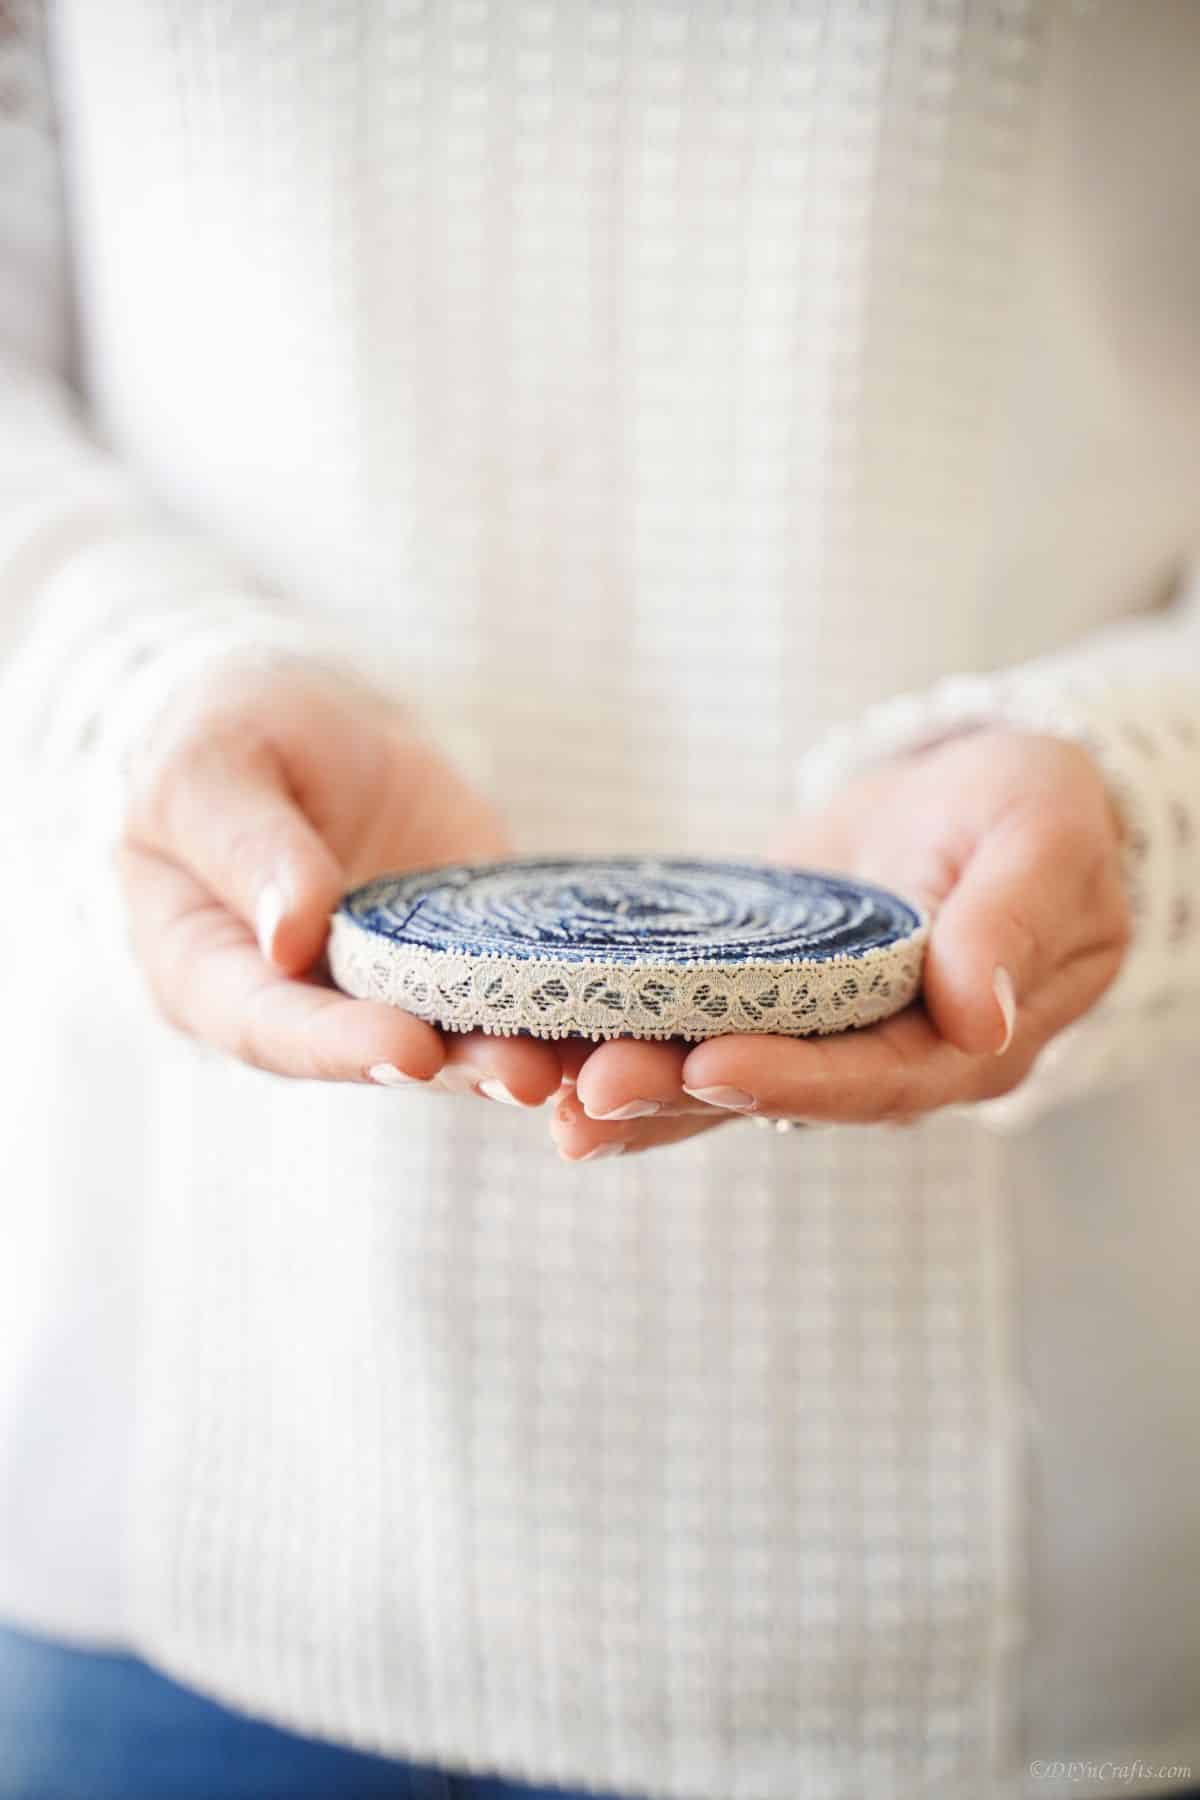 lace edged blue jeans coaster in hands of woman in white sweater